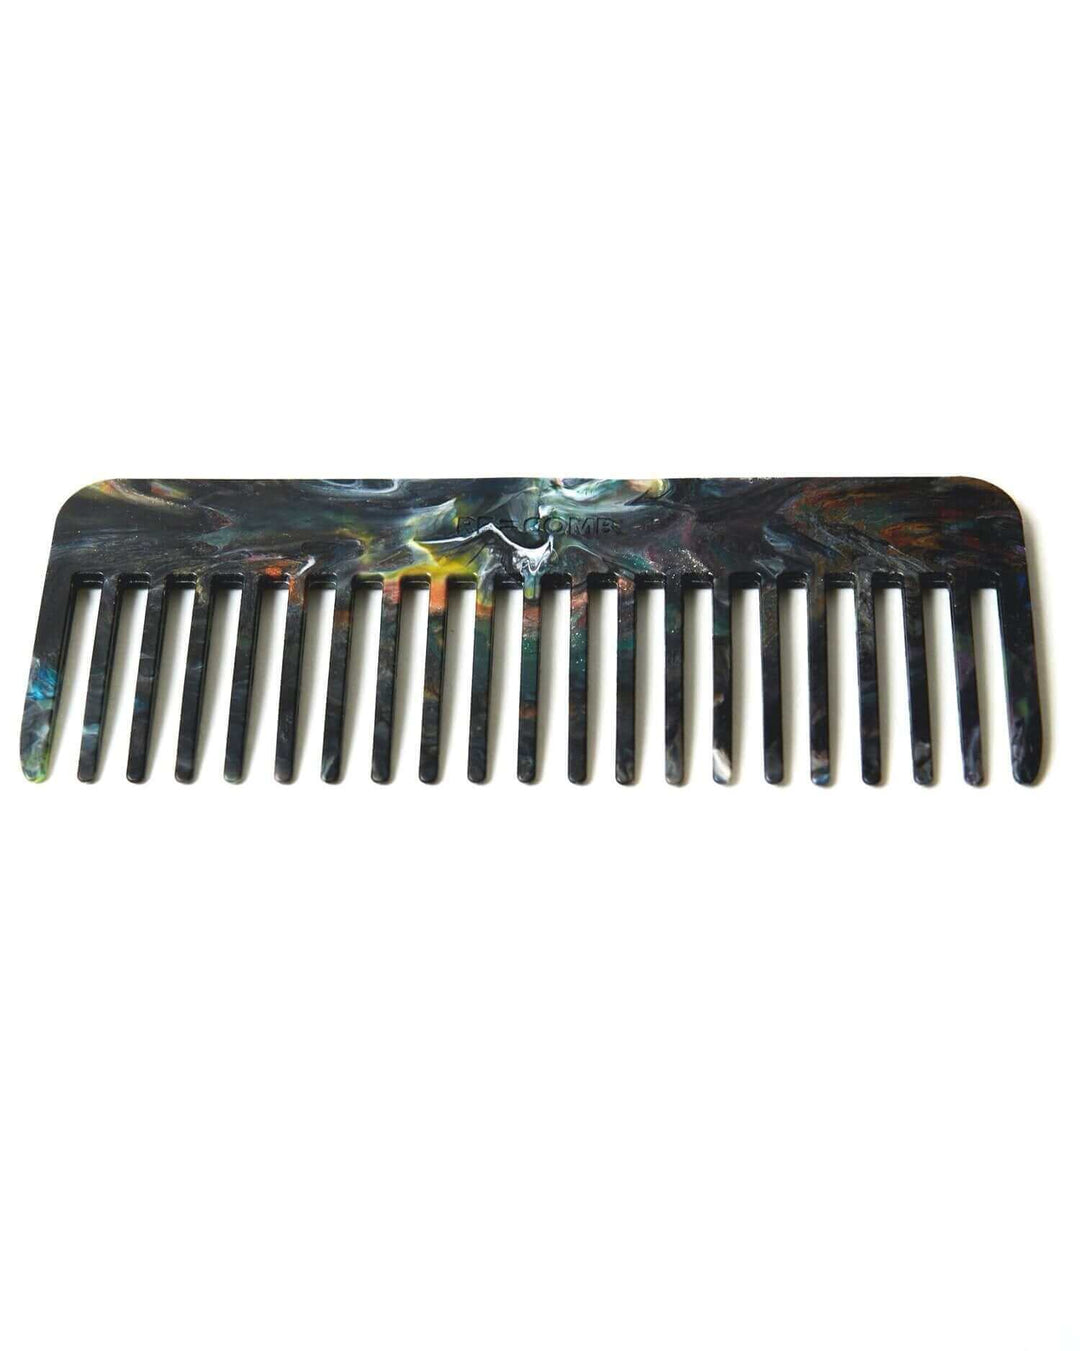 re-comb multi colour recycled hair comb